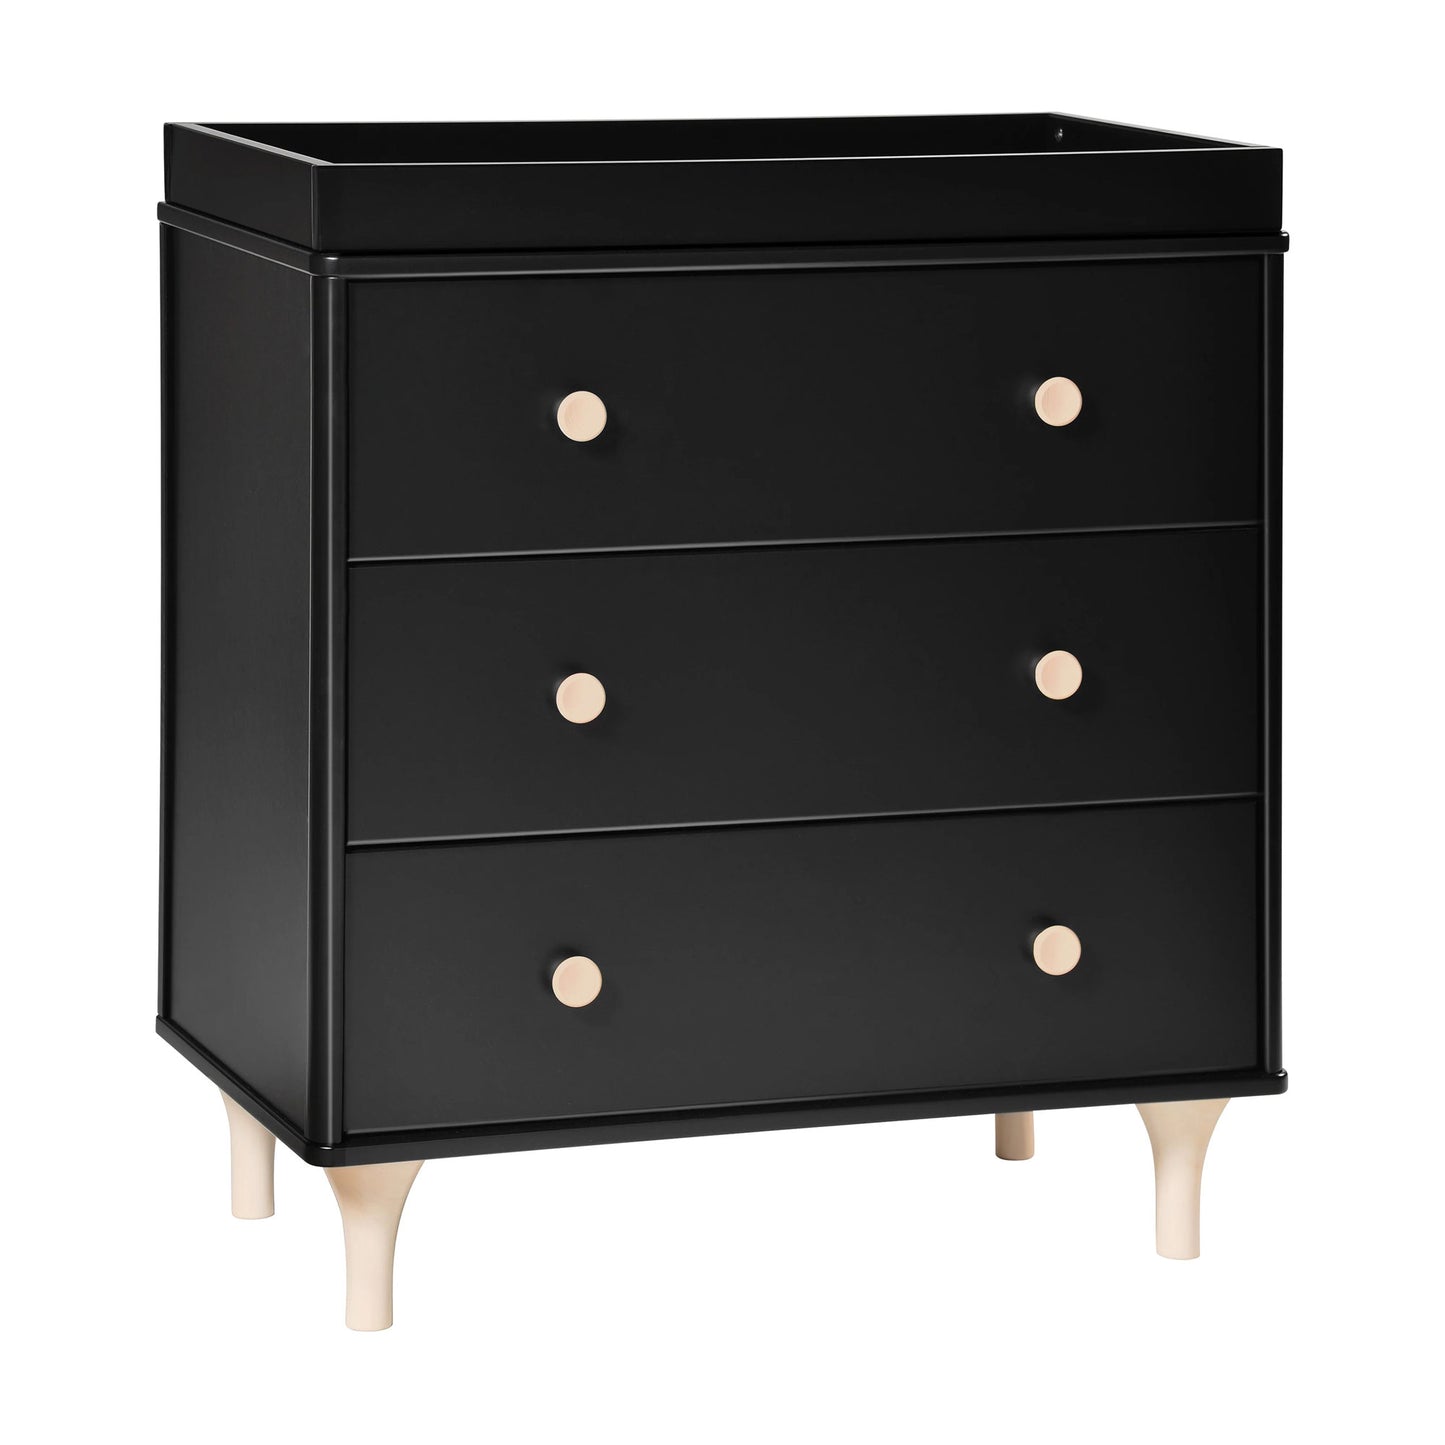 Babyletto Lolly 3-Drawer Changer Dresser with Removable Changing Tray - Black/Washed Natural